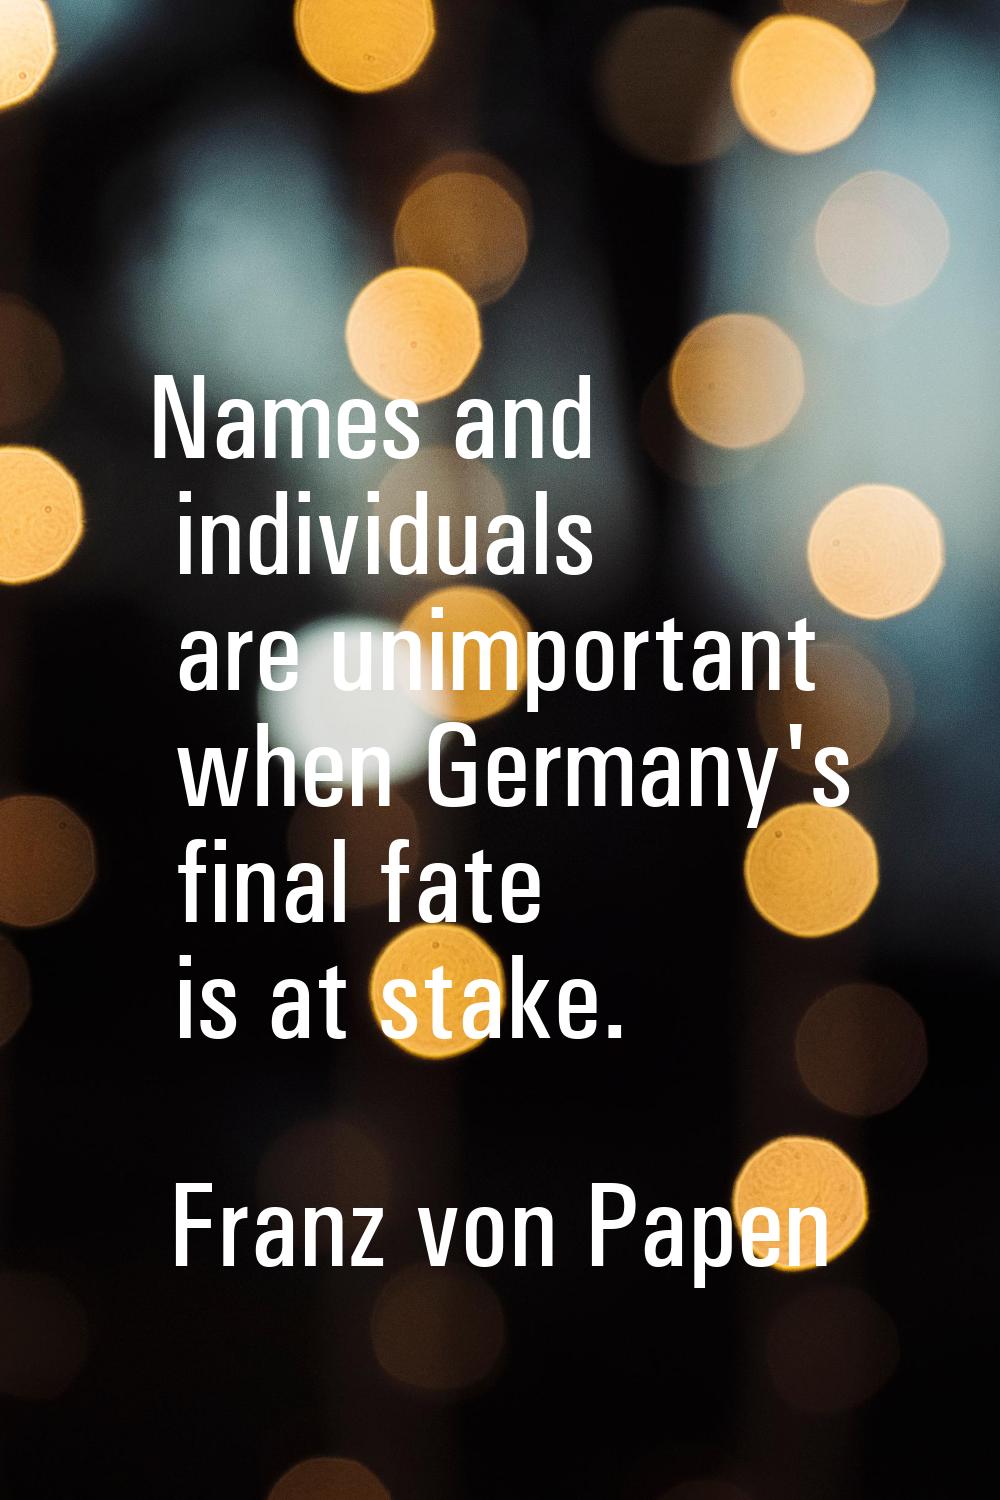 Names and individuals are unimportant when Germany's final fate is at stake.